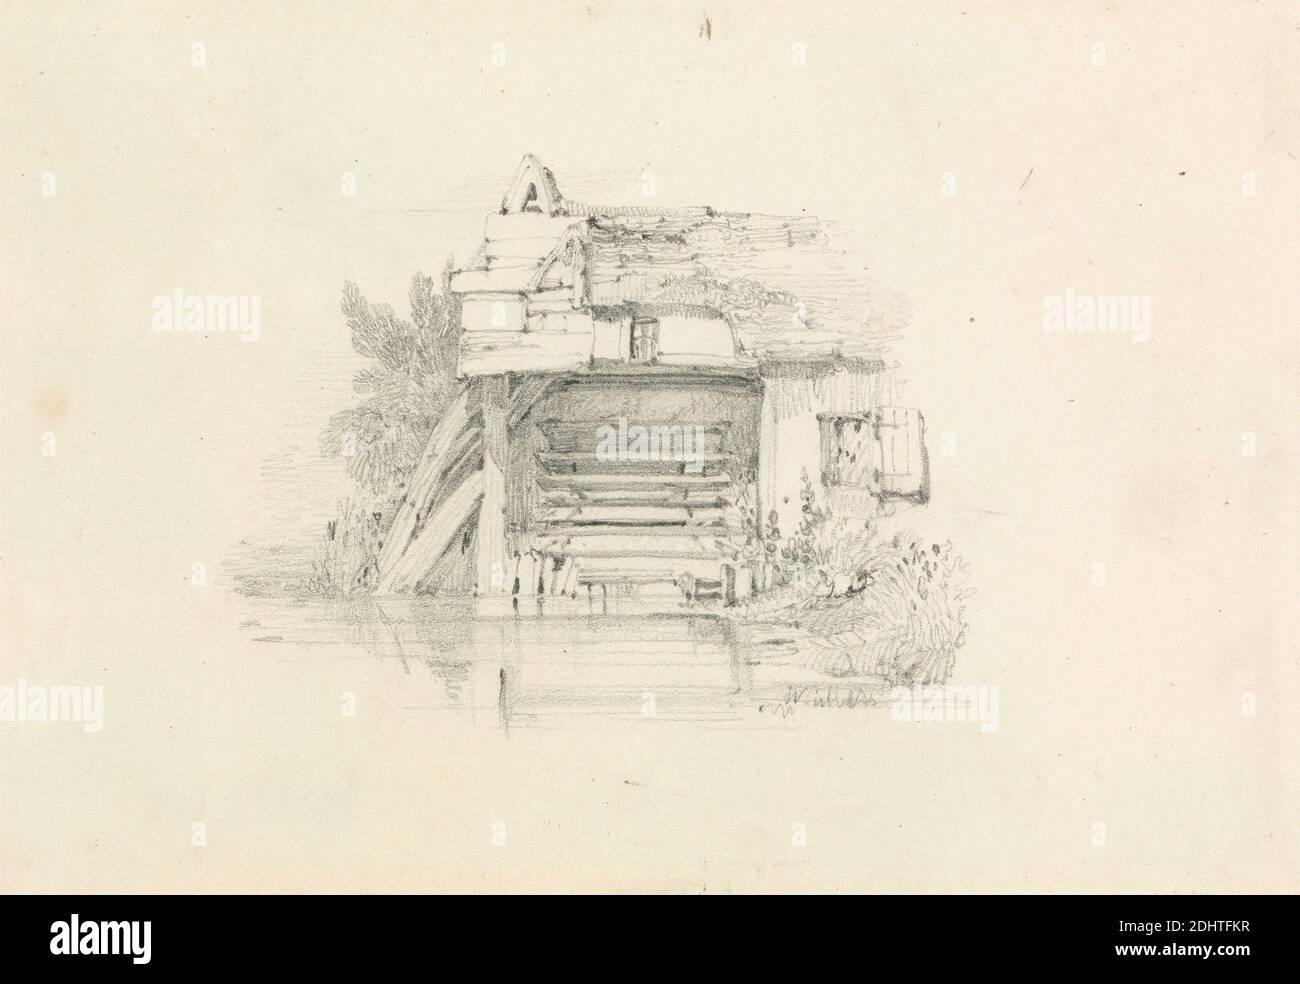 Watermill, William Callow, 1812–1908, British, active in France, undated, Graphite on blued white, medium, slightly textured, wove paper, Sheet: 4 × 5 5/8 inches (10.2 × 14.3 cm), architectural subject, study (visual work), water mill, wheel Stock Photo